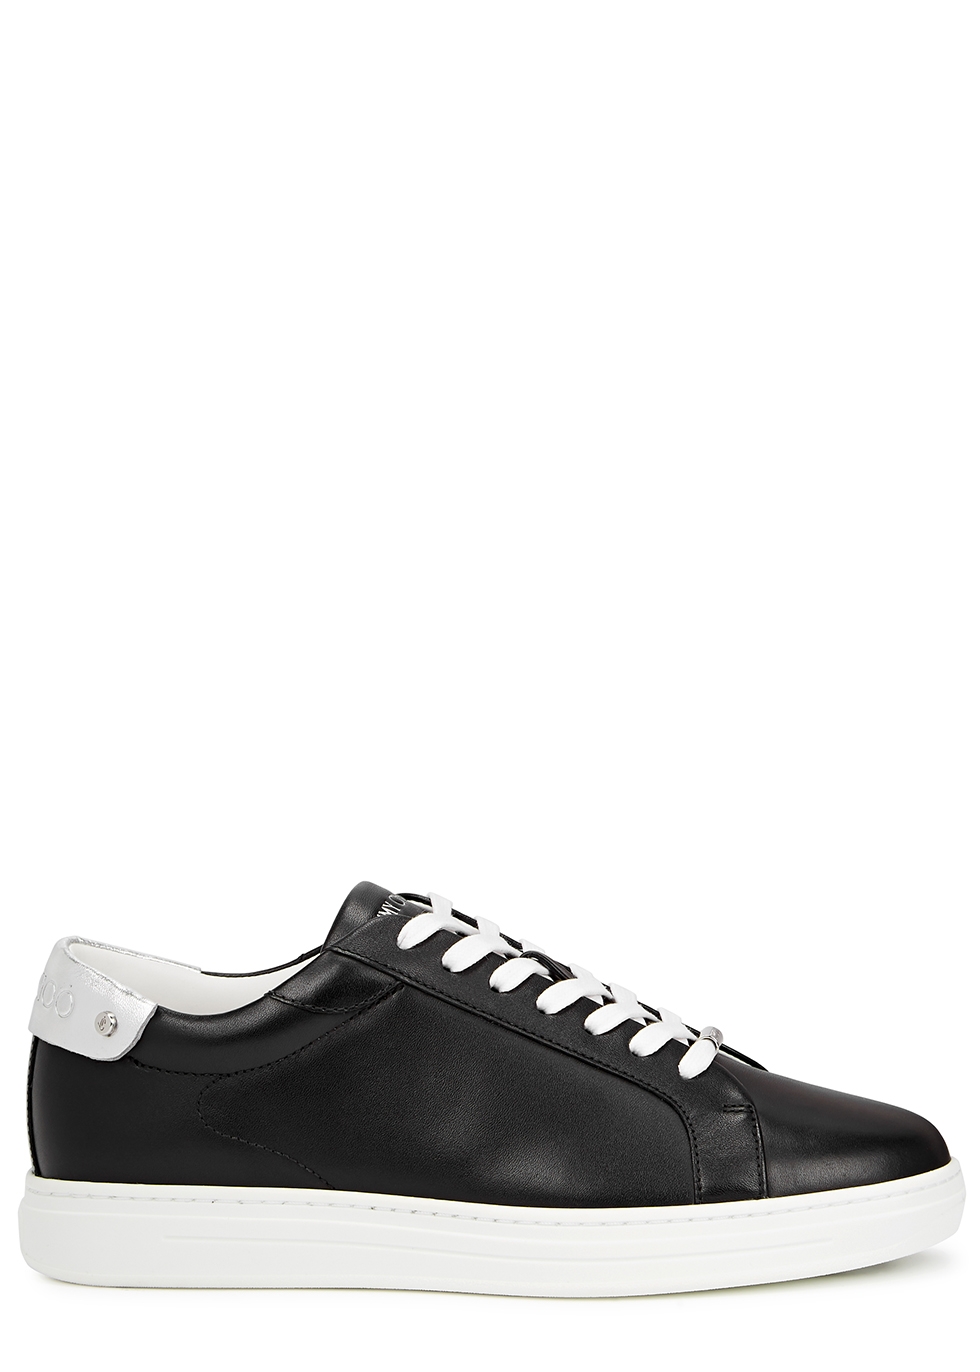 Rome black leather sneakers